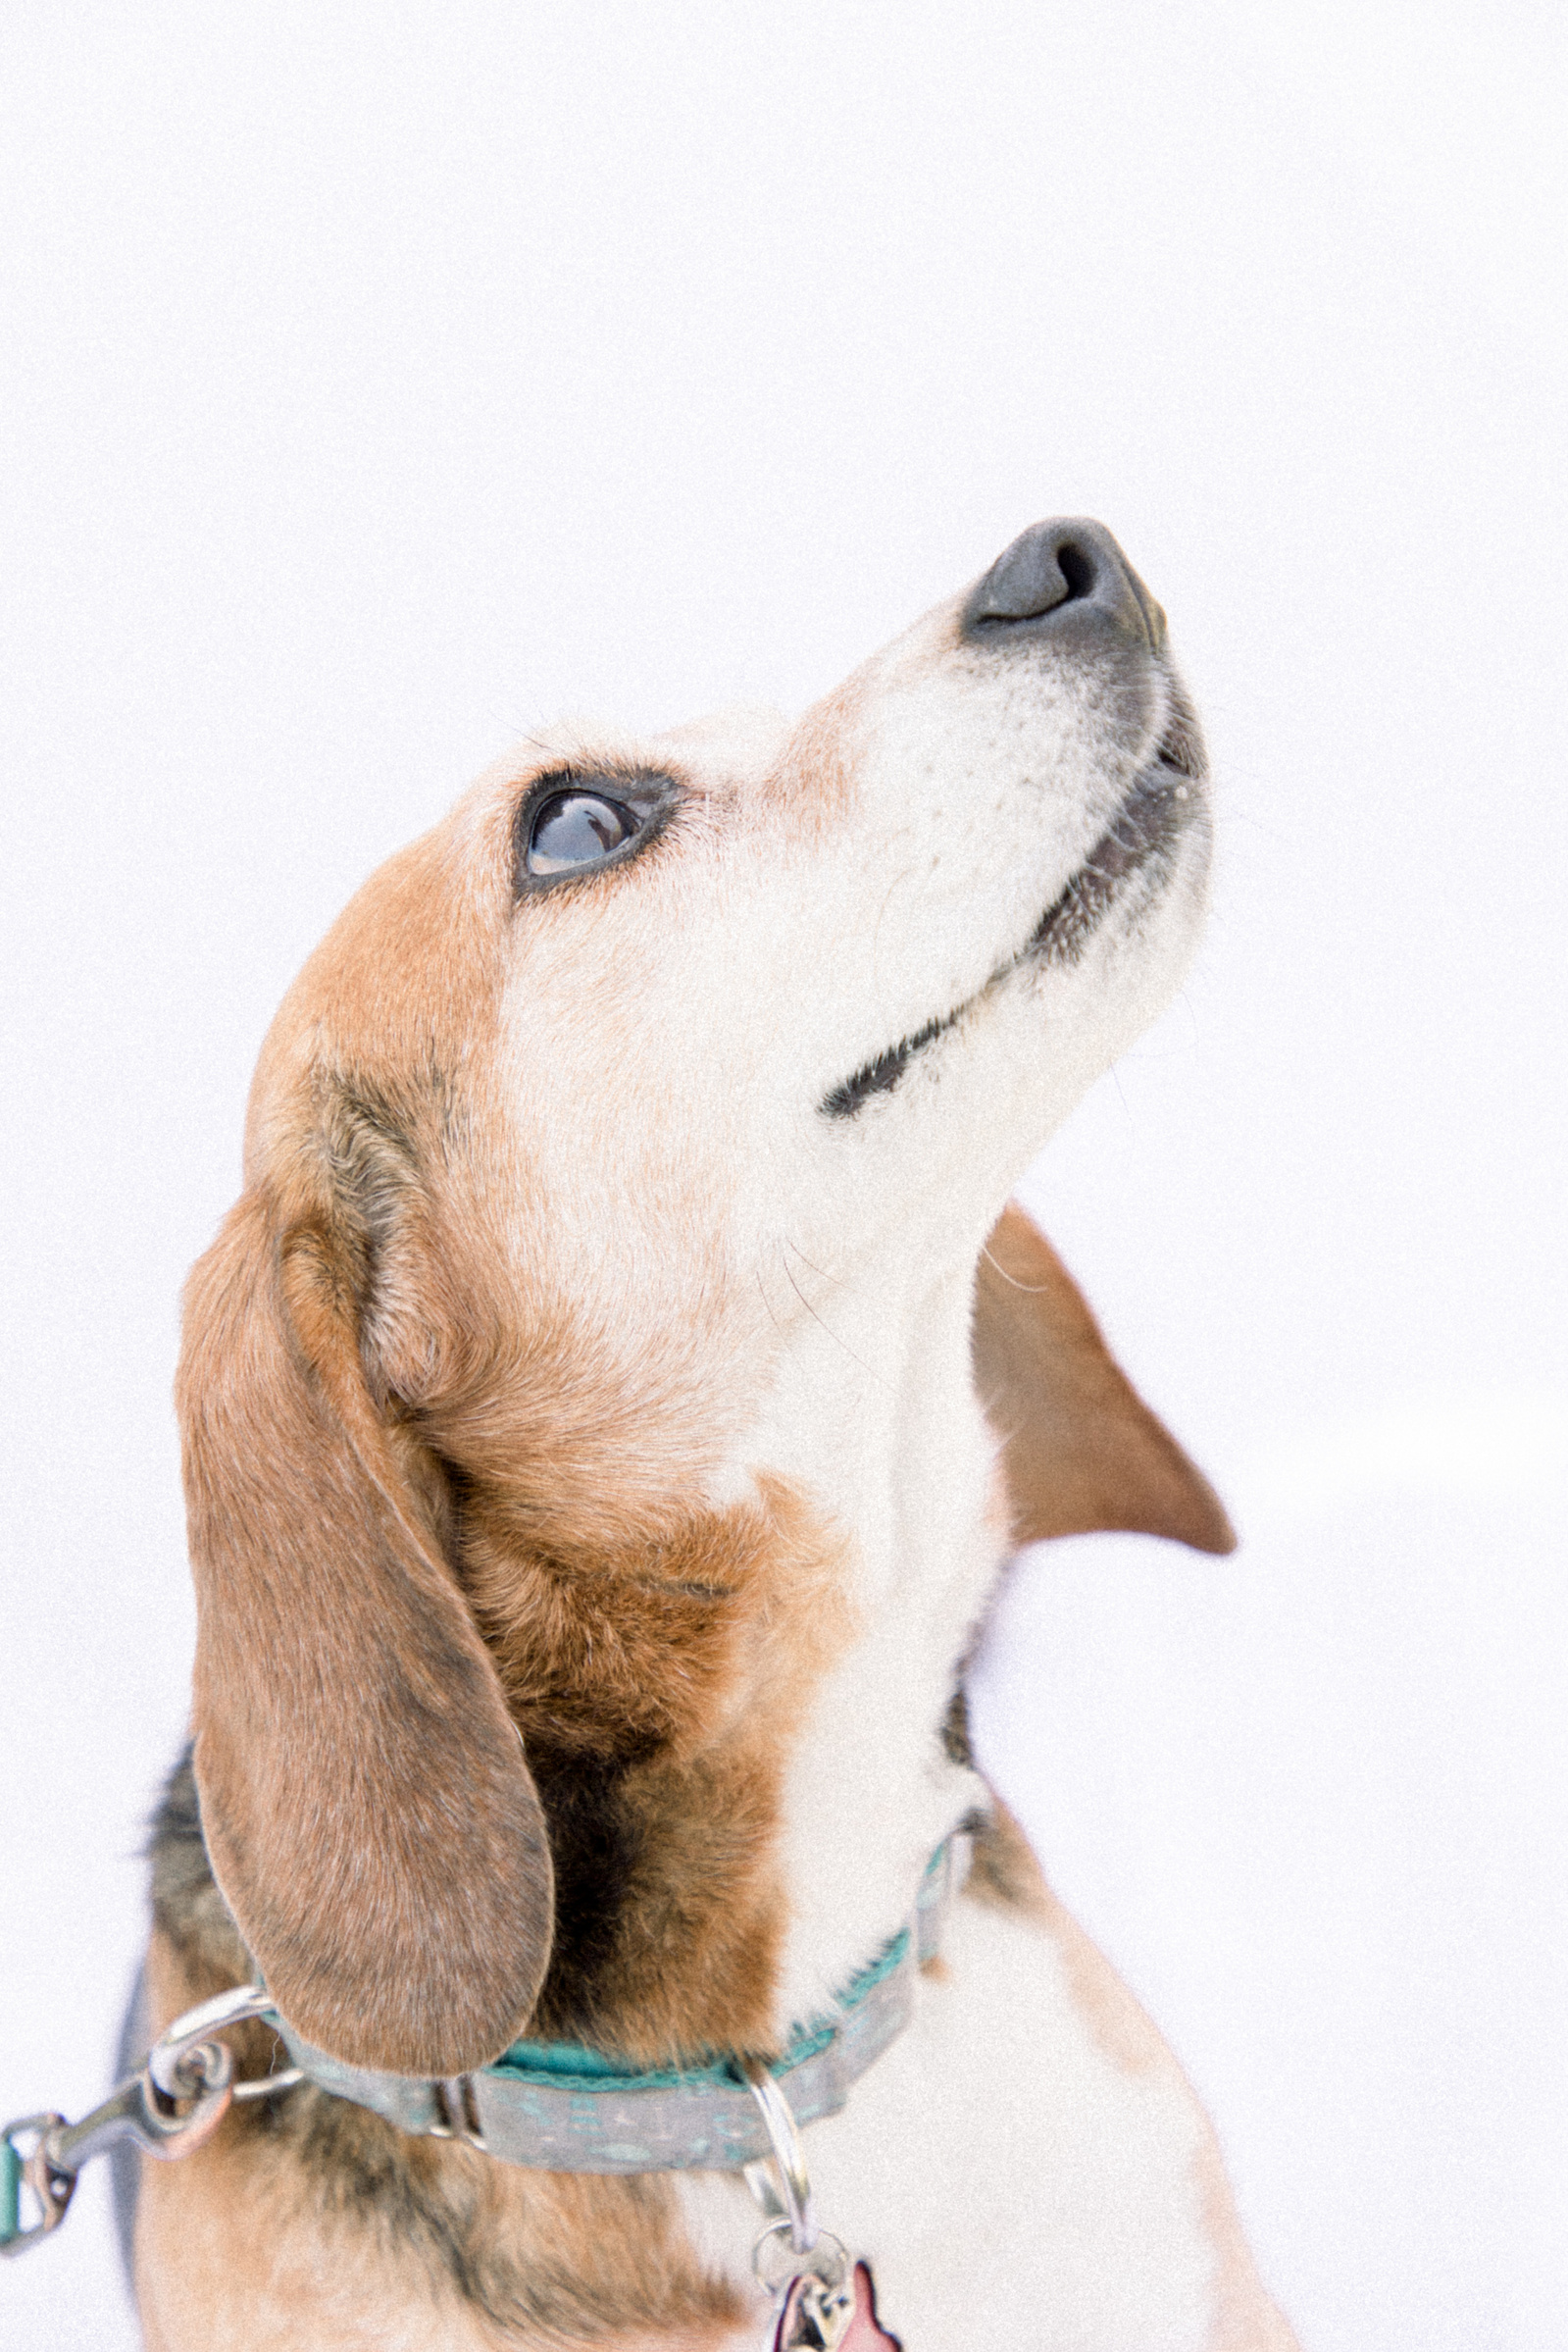 Light and airy photo of a beagle sitting down, looking up. Emily VanderBeek Photography, Niagara portrait photographer, Niagara family photographer, candid photography, authentic photography, Ottawa portrait photographer, pet photography.